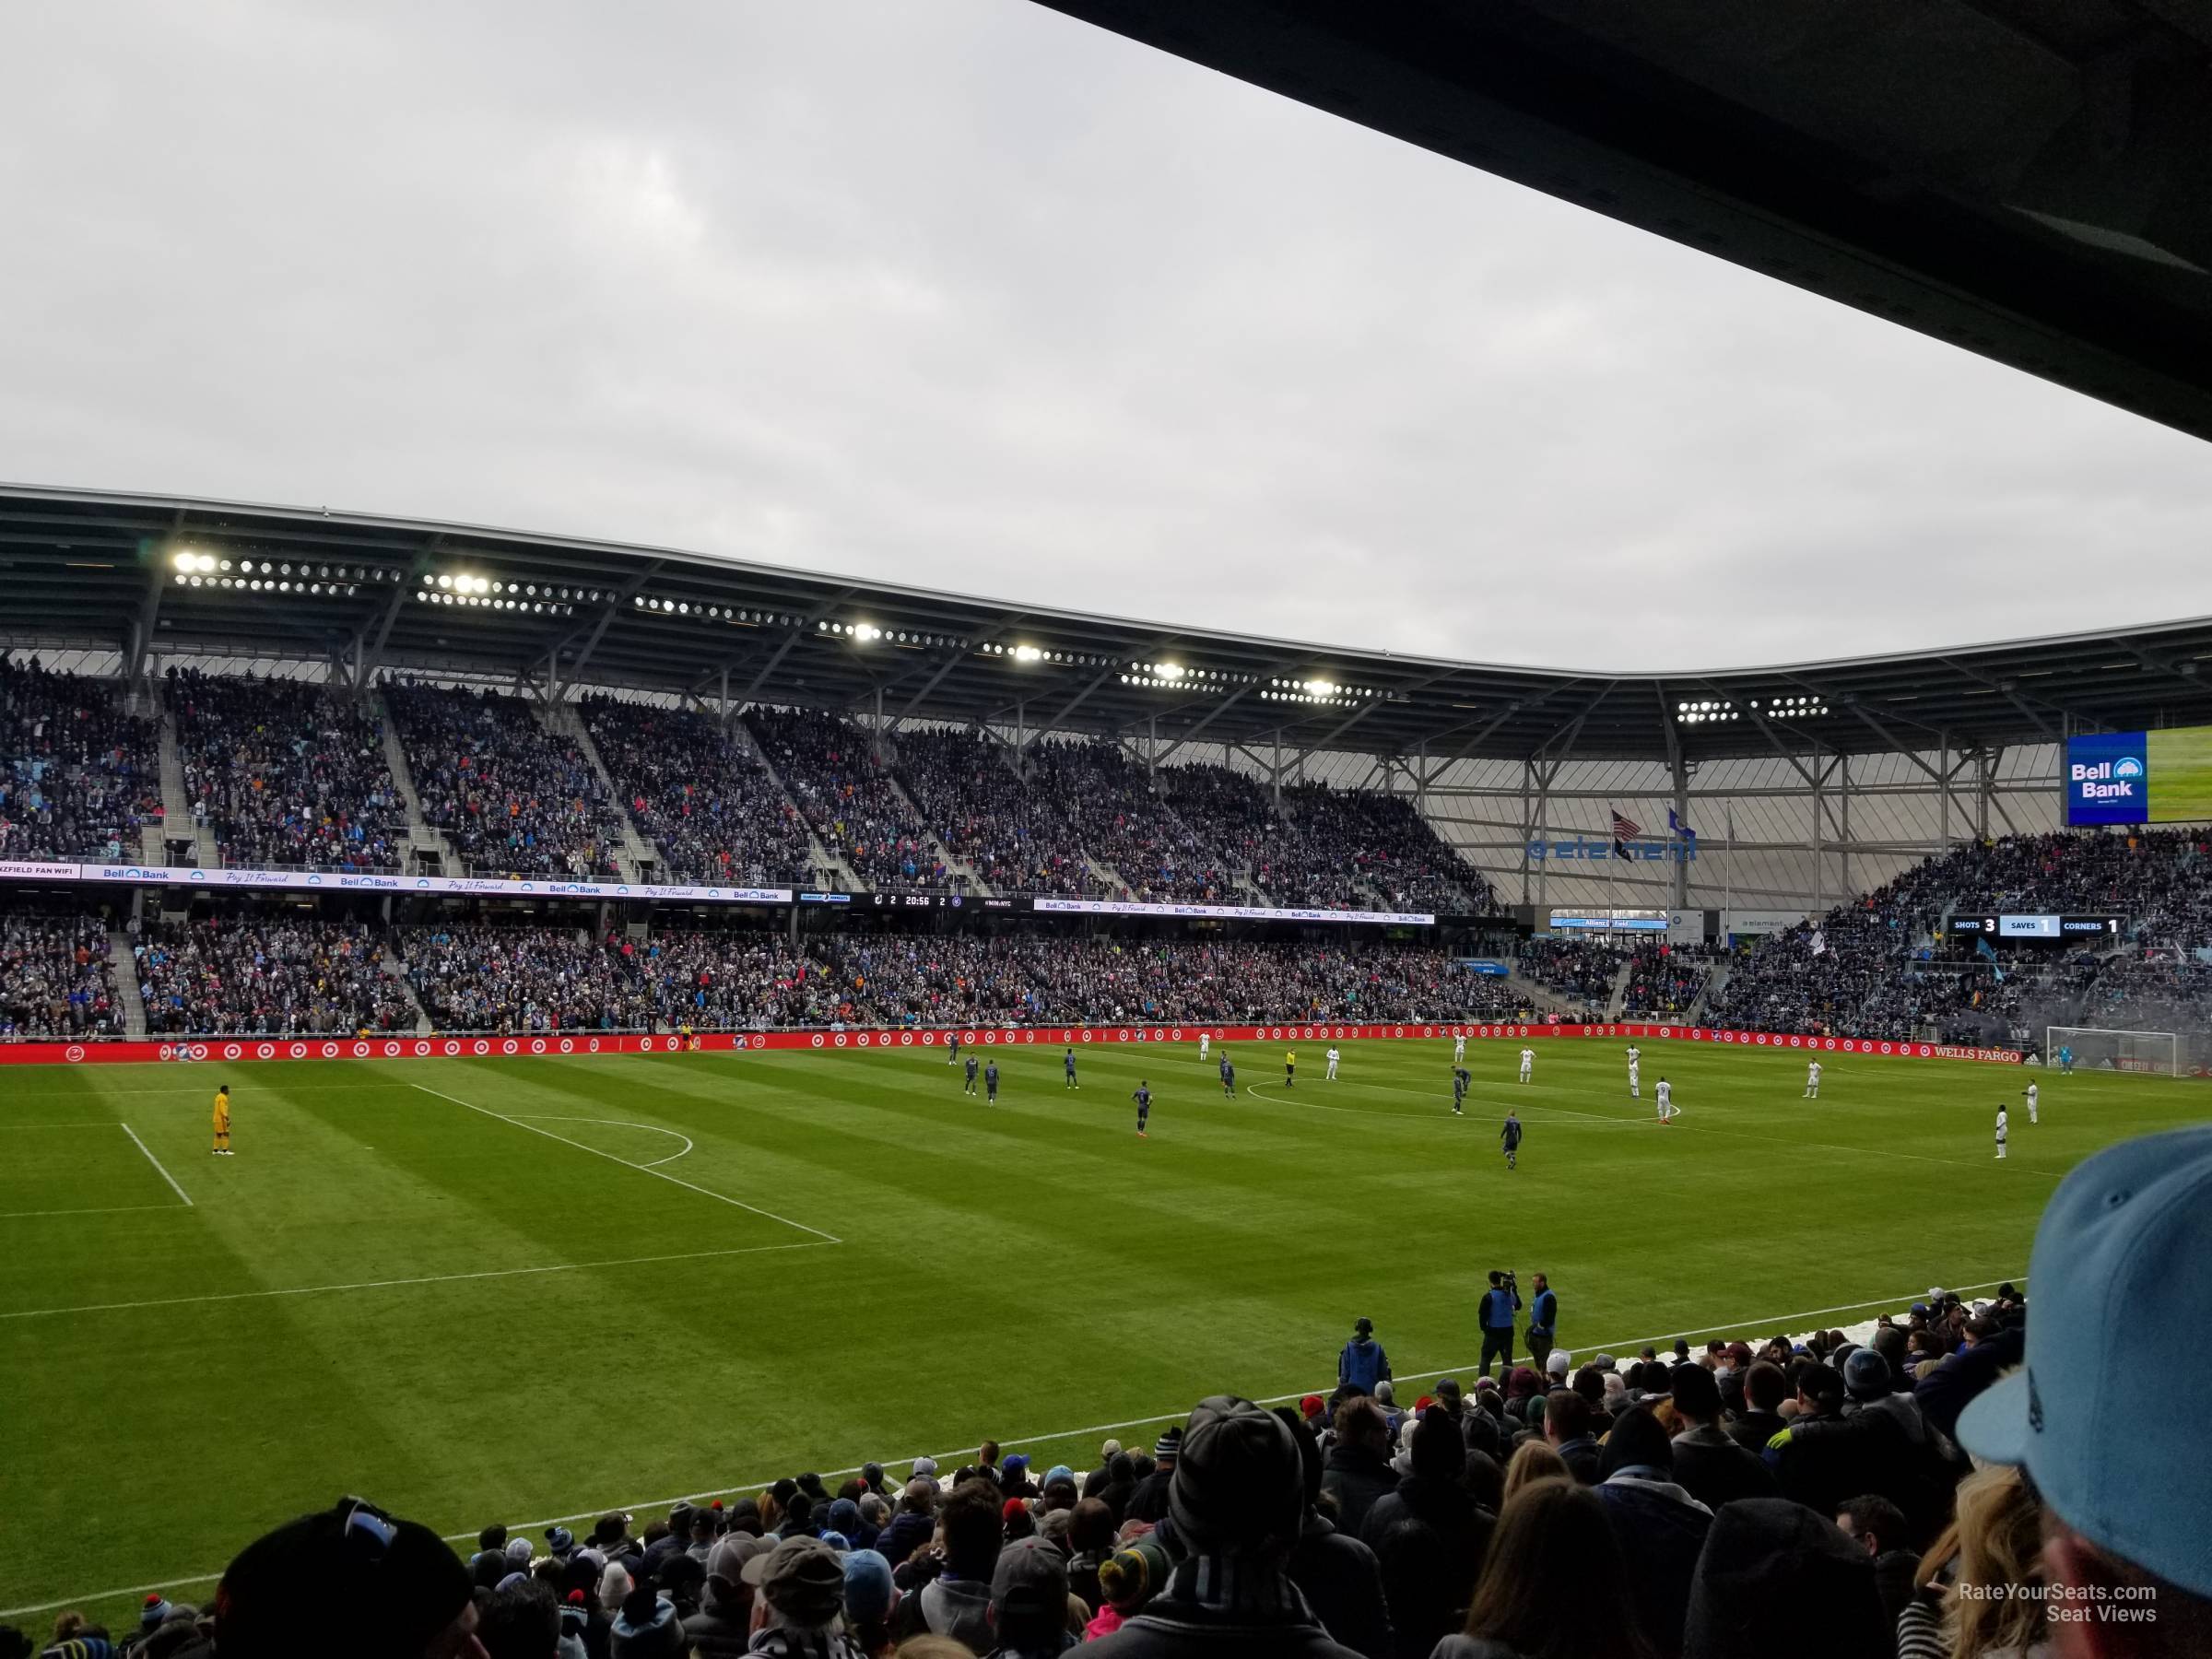 section 36, row 18 seat view  - allianz field